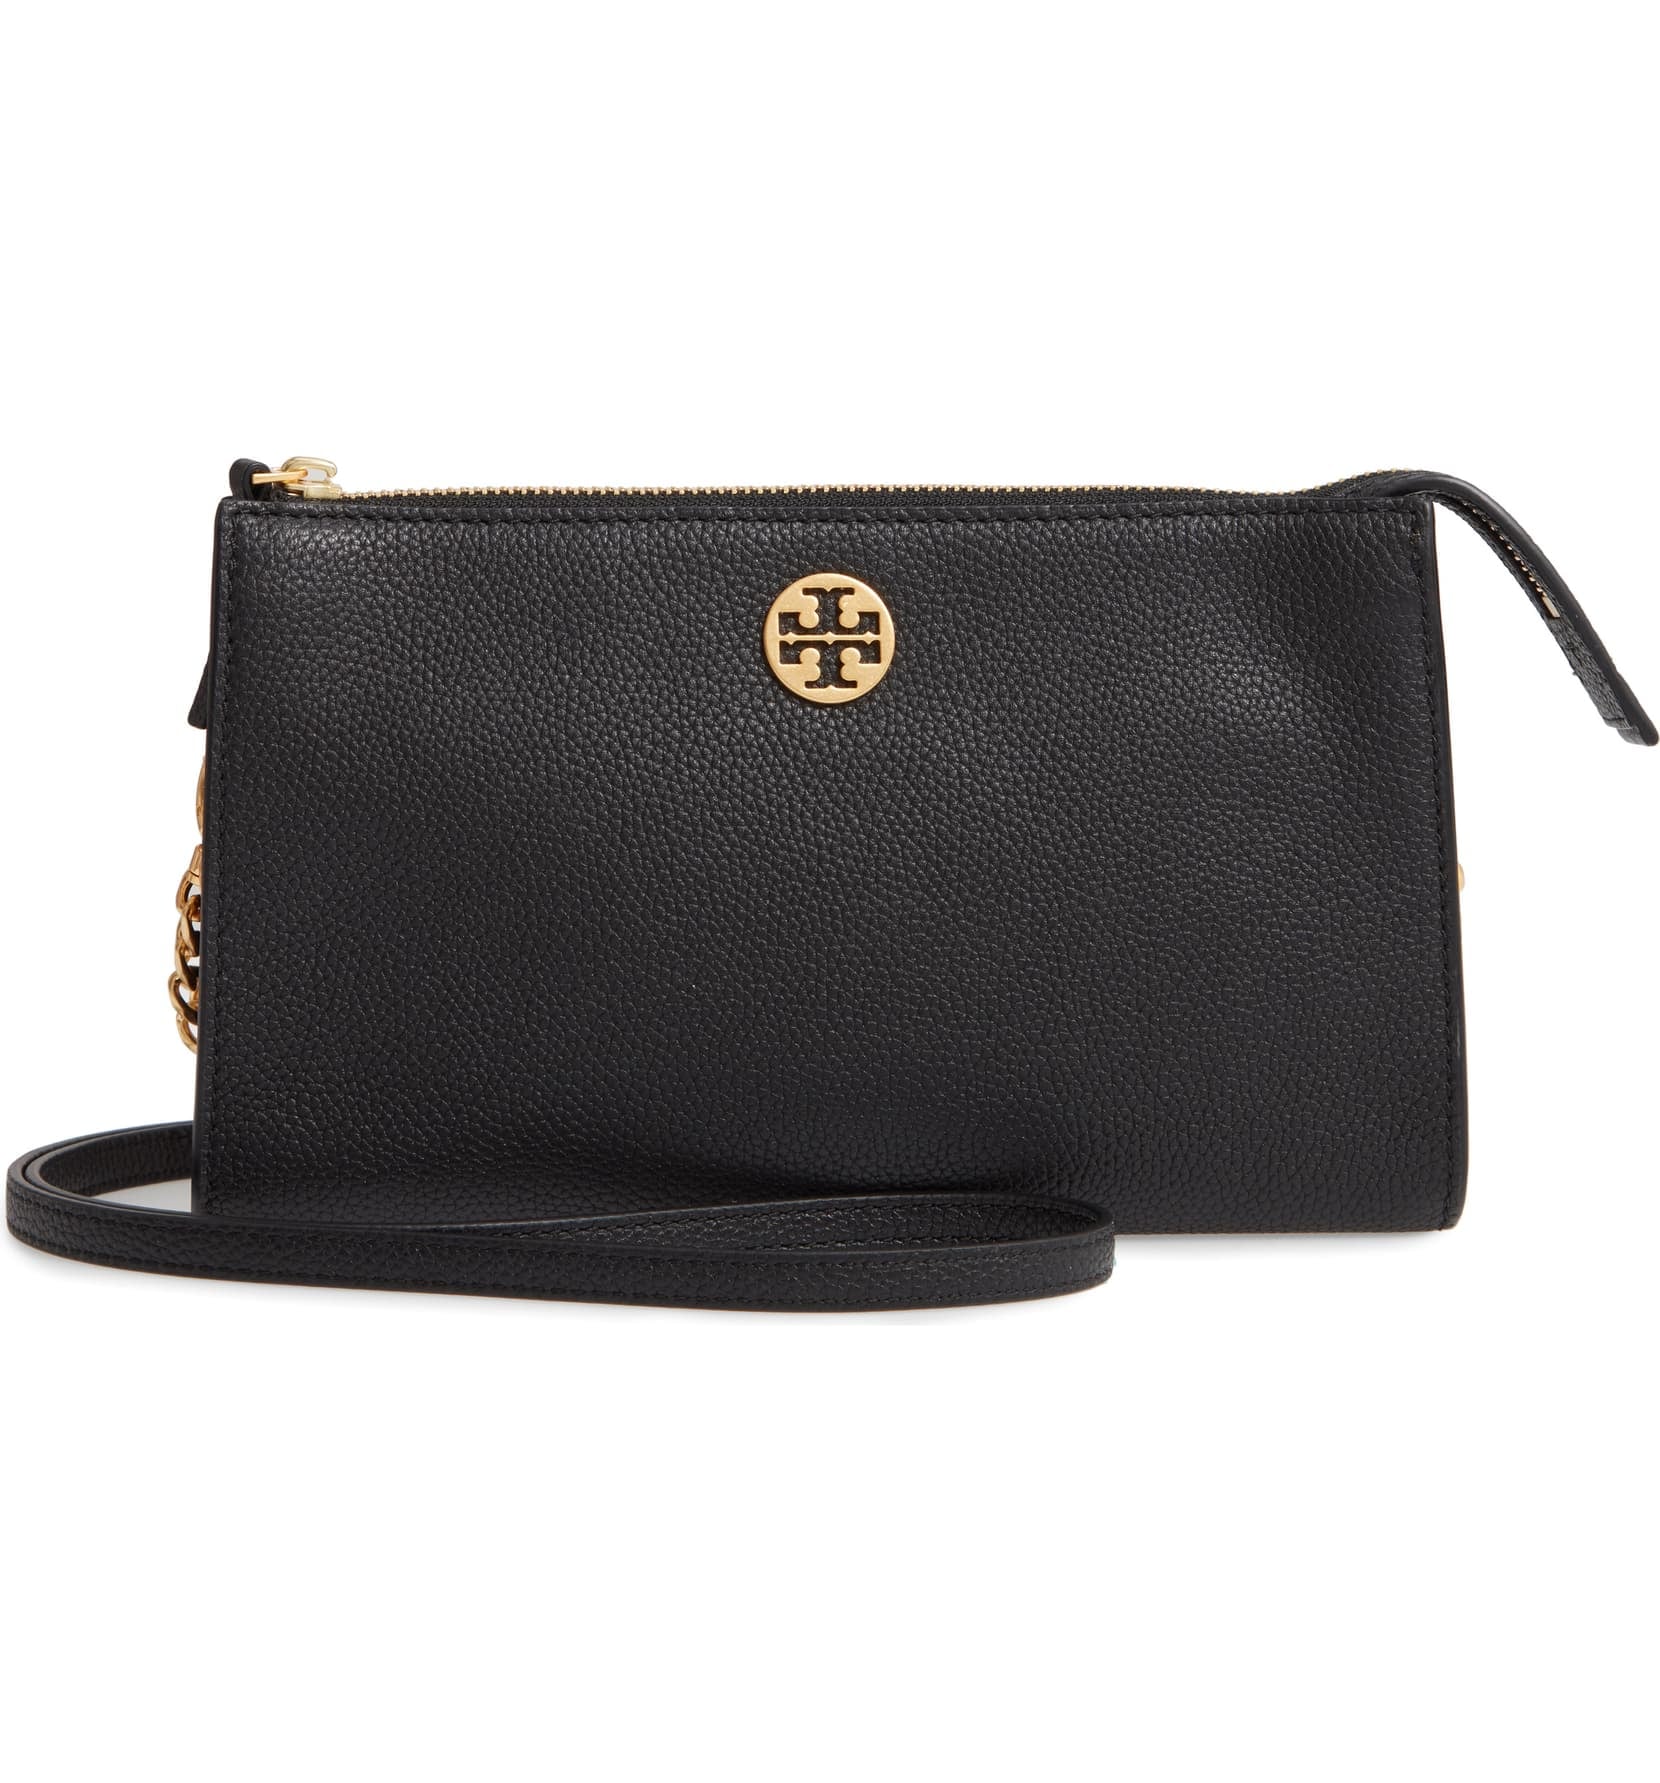 Tory Burch Mini Everly Leather Crossbody Bag | Nordstrom Just Discounted Tons of Its Newest Fall Bags — These 19 Are Already Selling Fast | POPSUGAR Fashion Photo 9